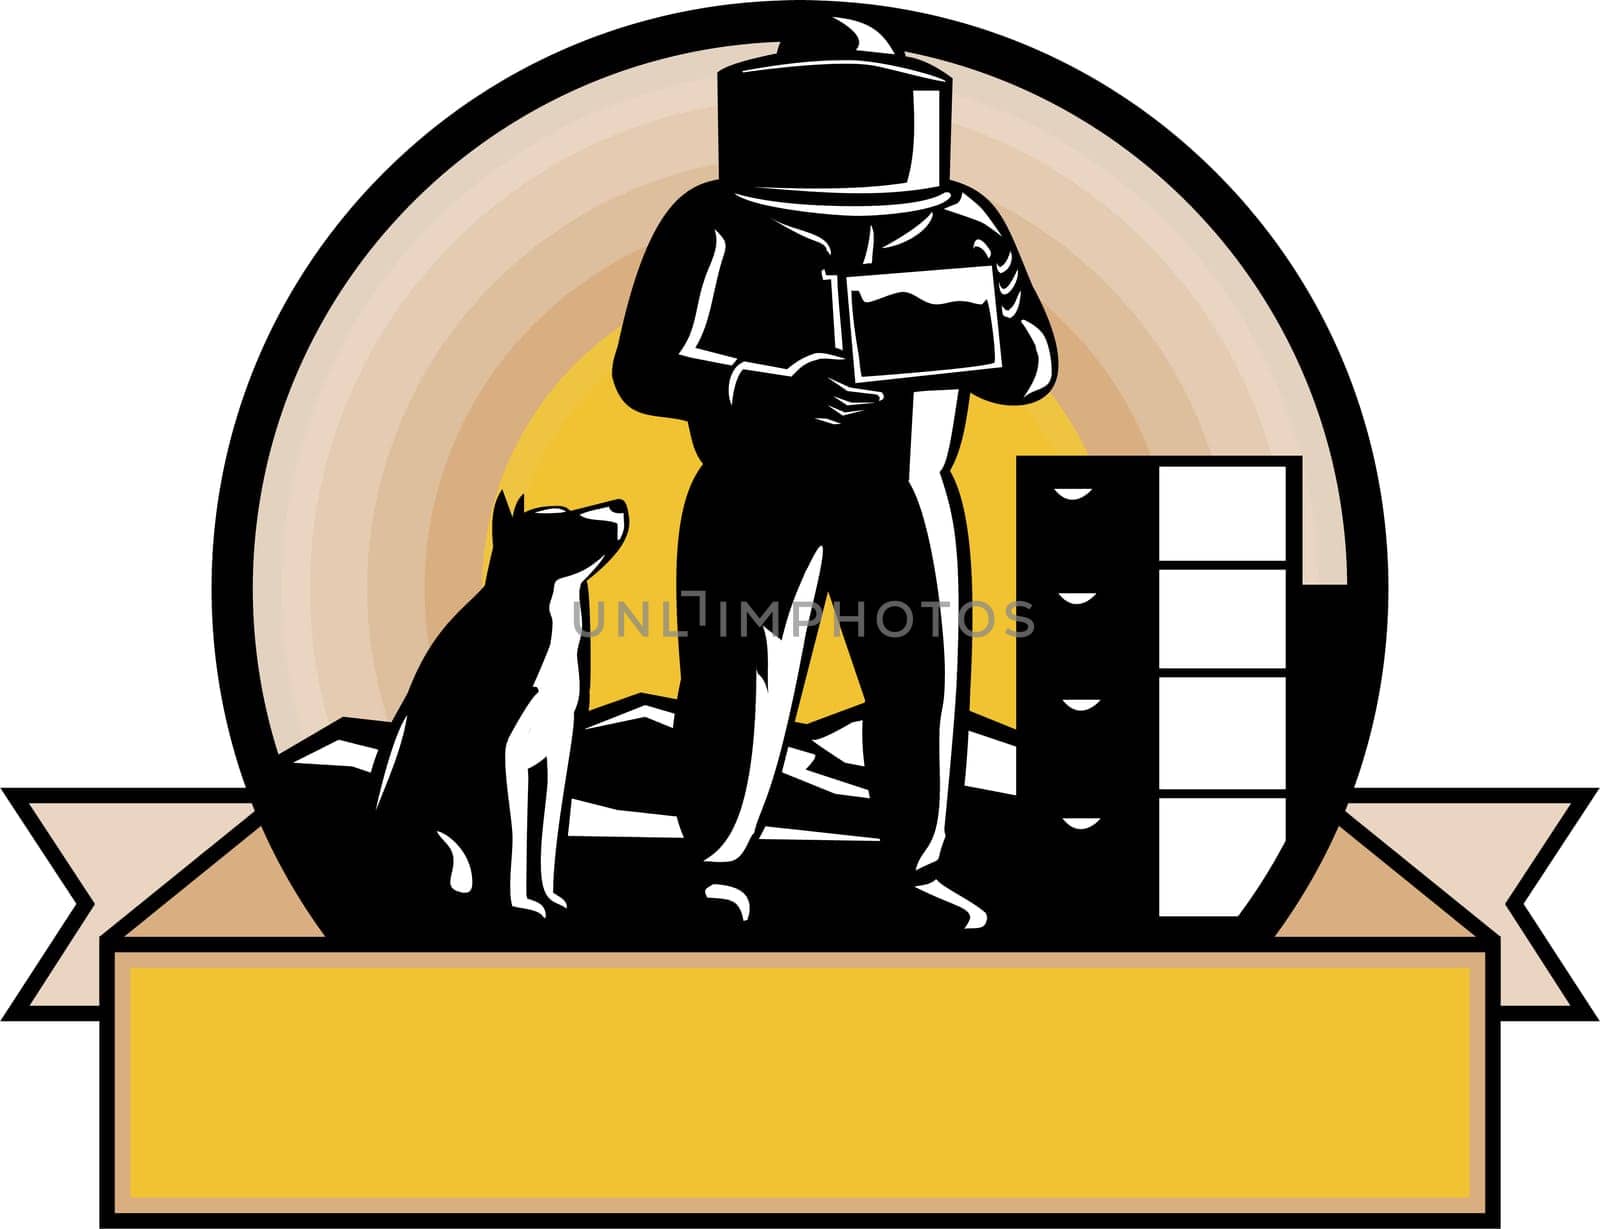 Retro style illustration of beekeeper wearing bee suit with border collie dog sitting and beehive with mountains inside circle with banner scroll in color.